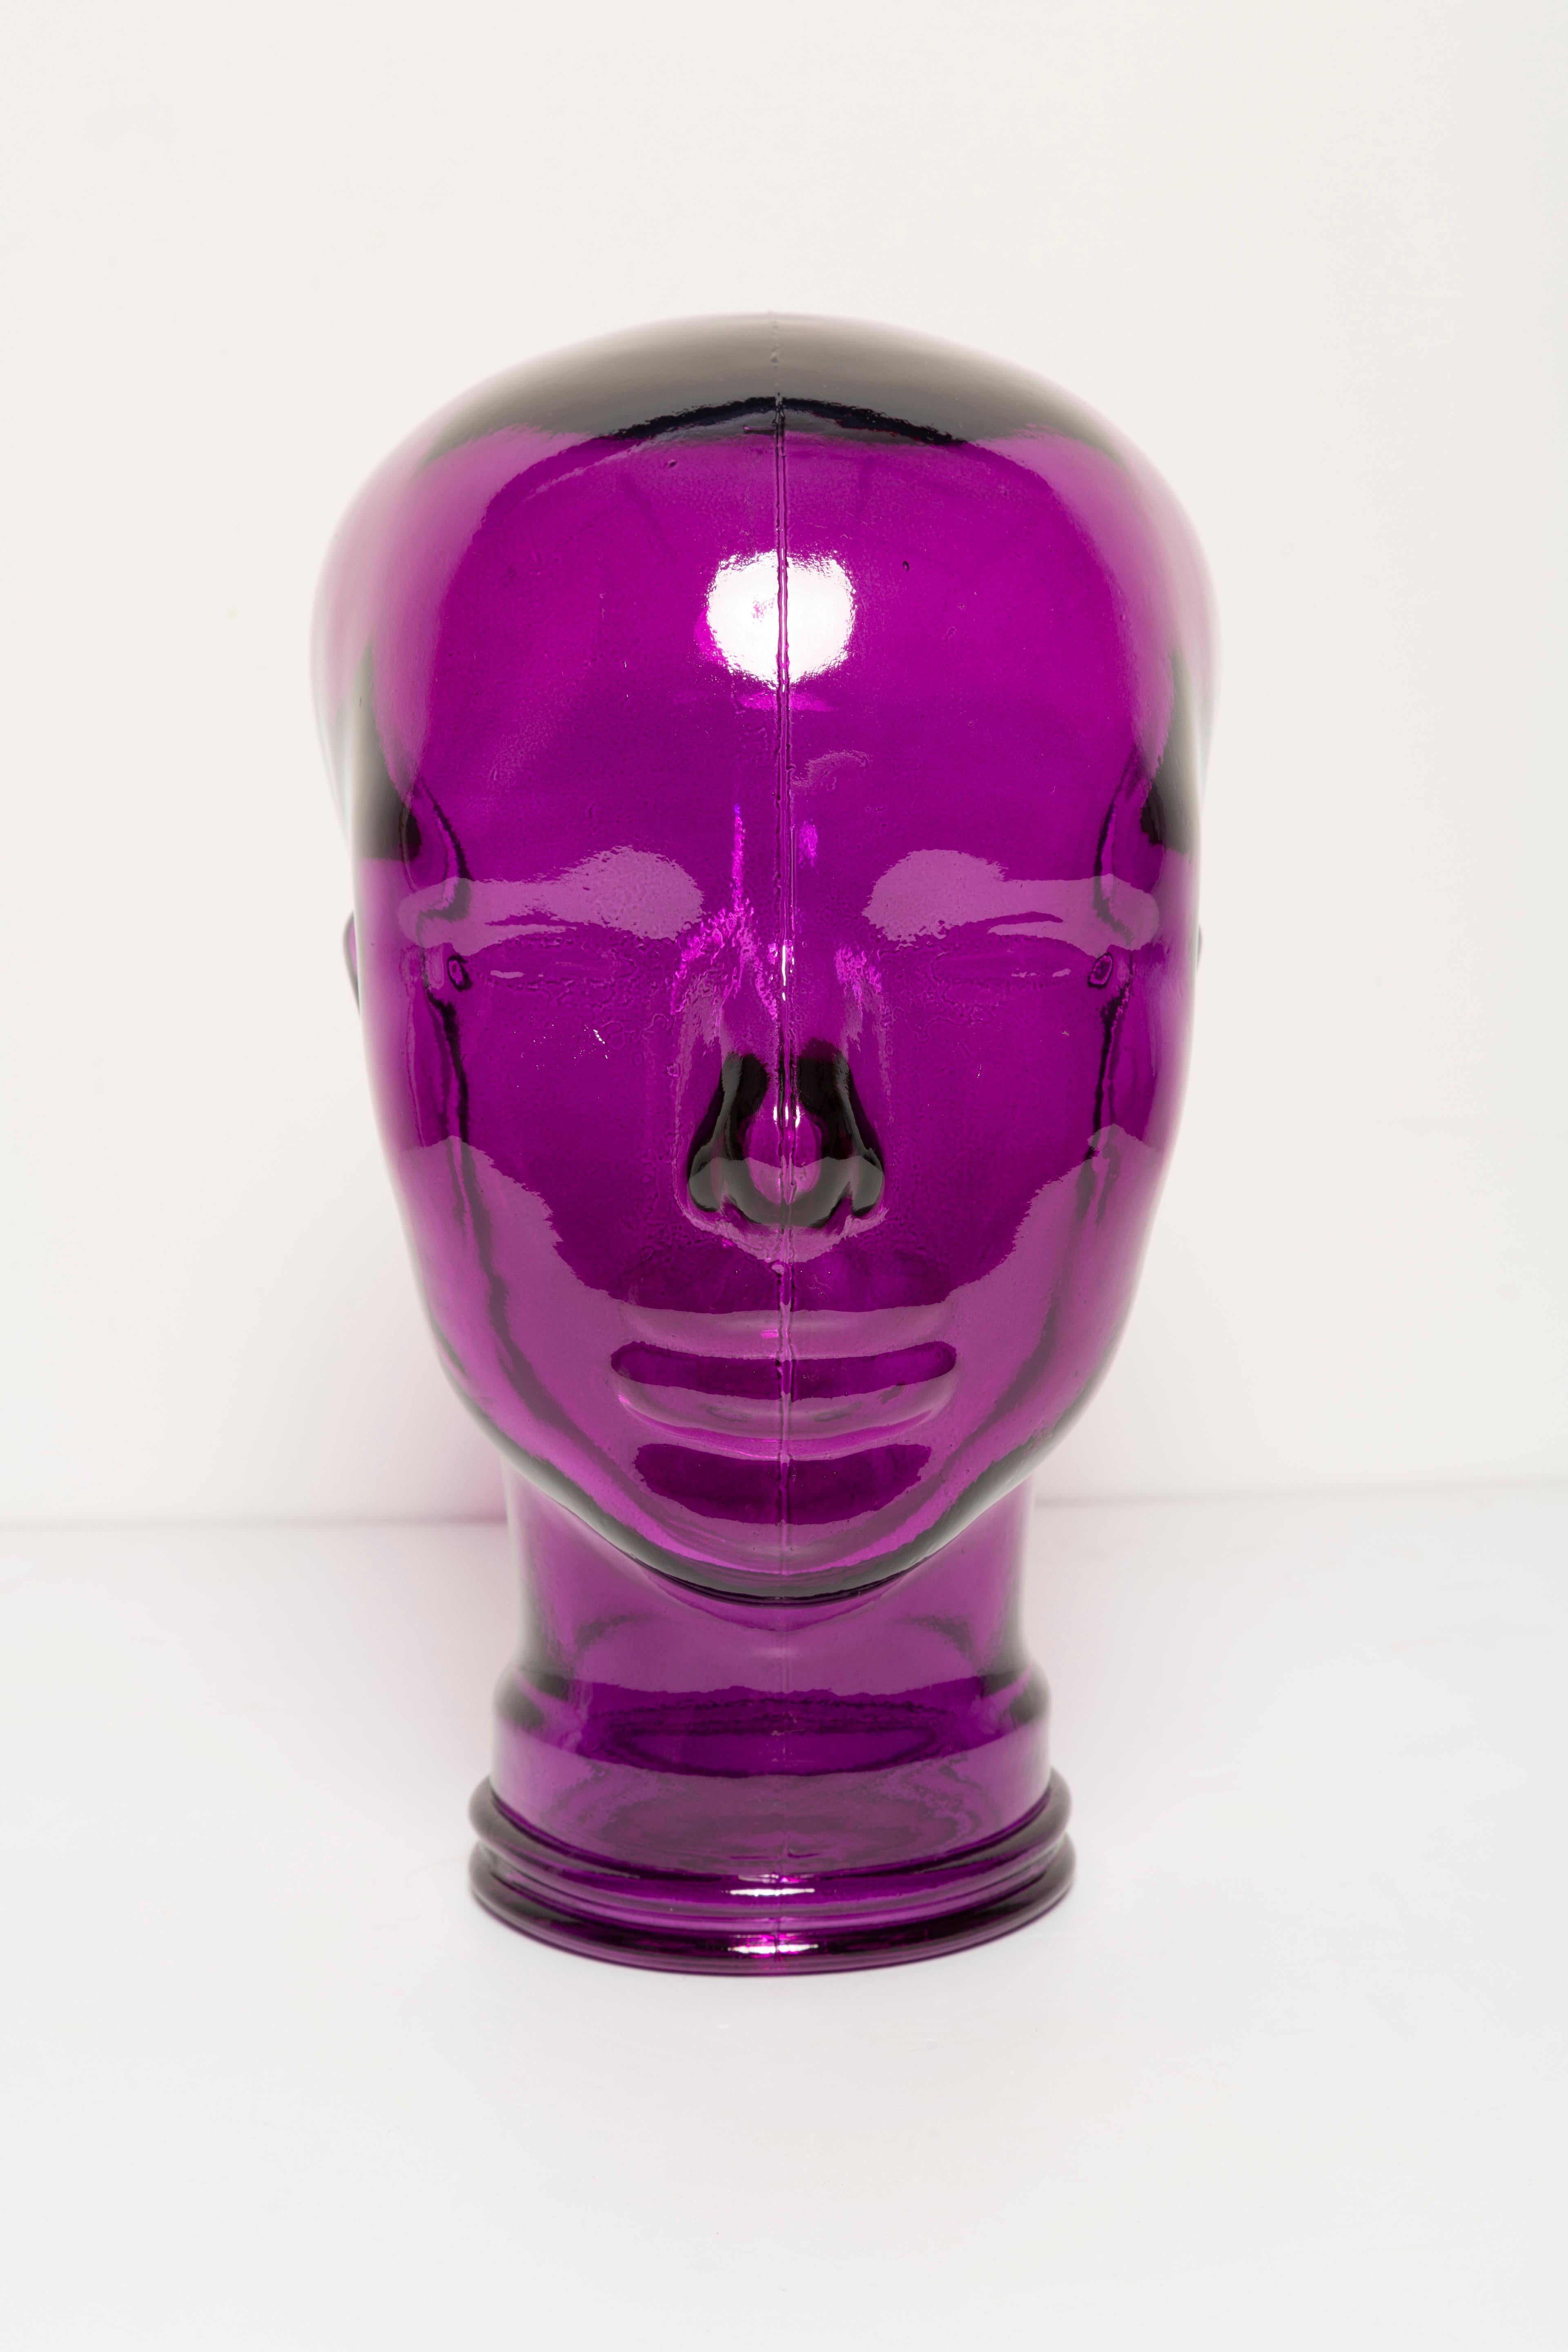 Life-size glass head in a unique purple violet color. Produced in a German steelworks in the 1970s. Perfect condition. A perfect addition to the interior, photo prop, display or headphone stand.